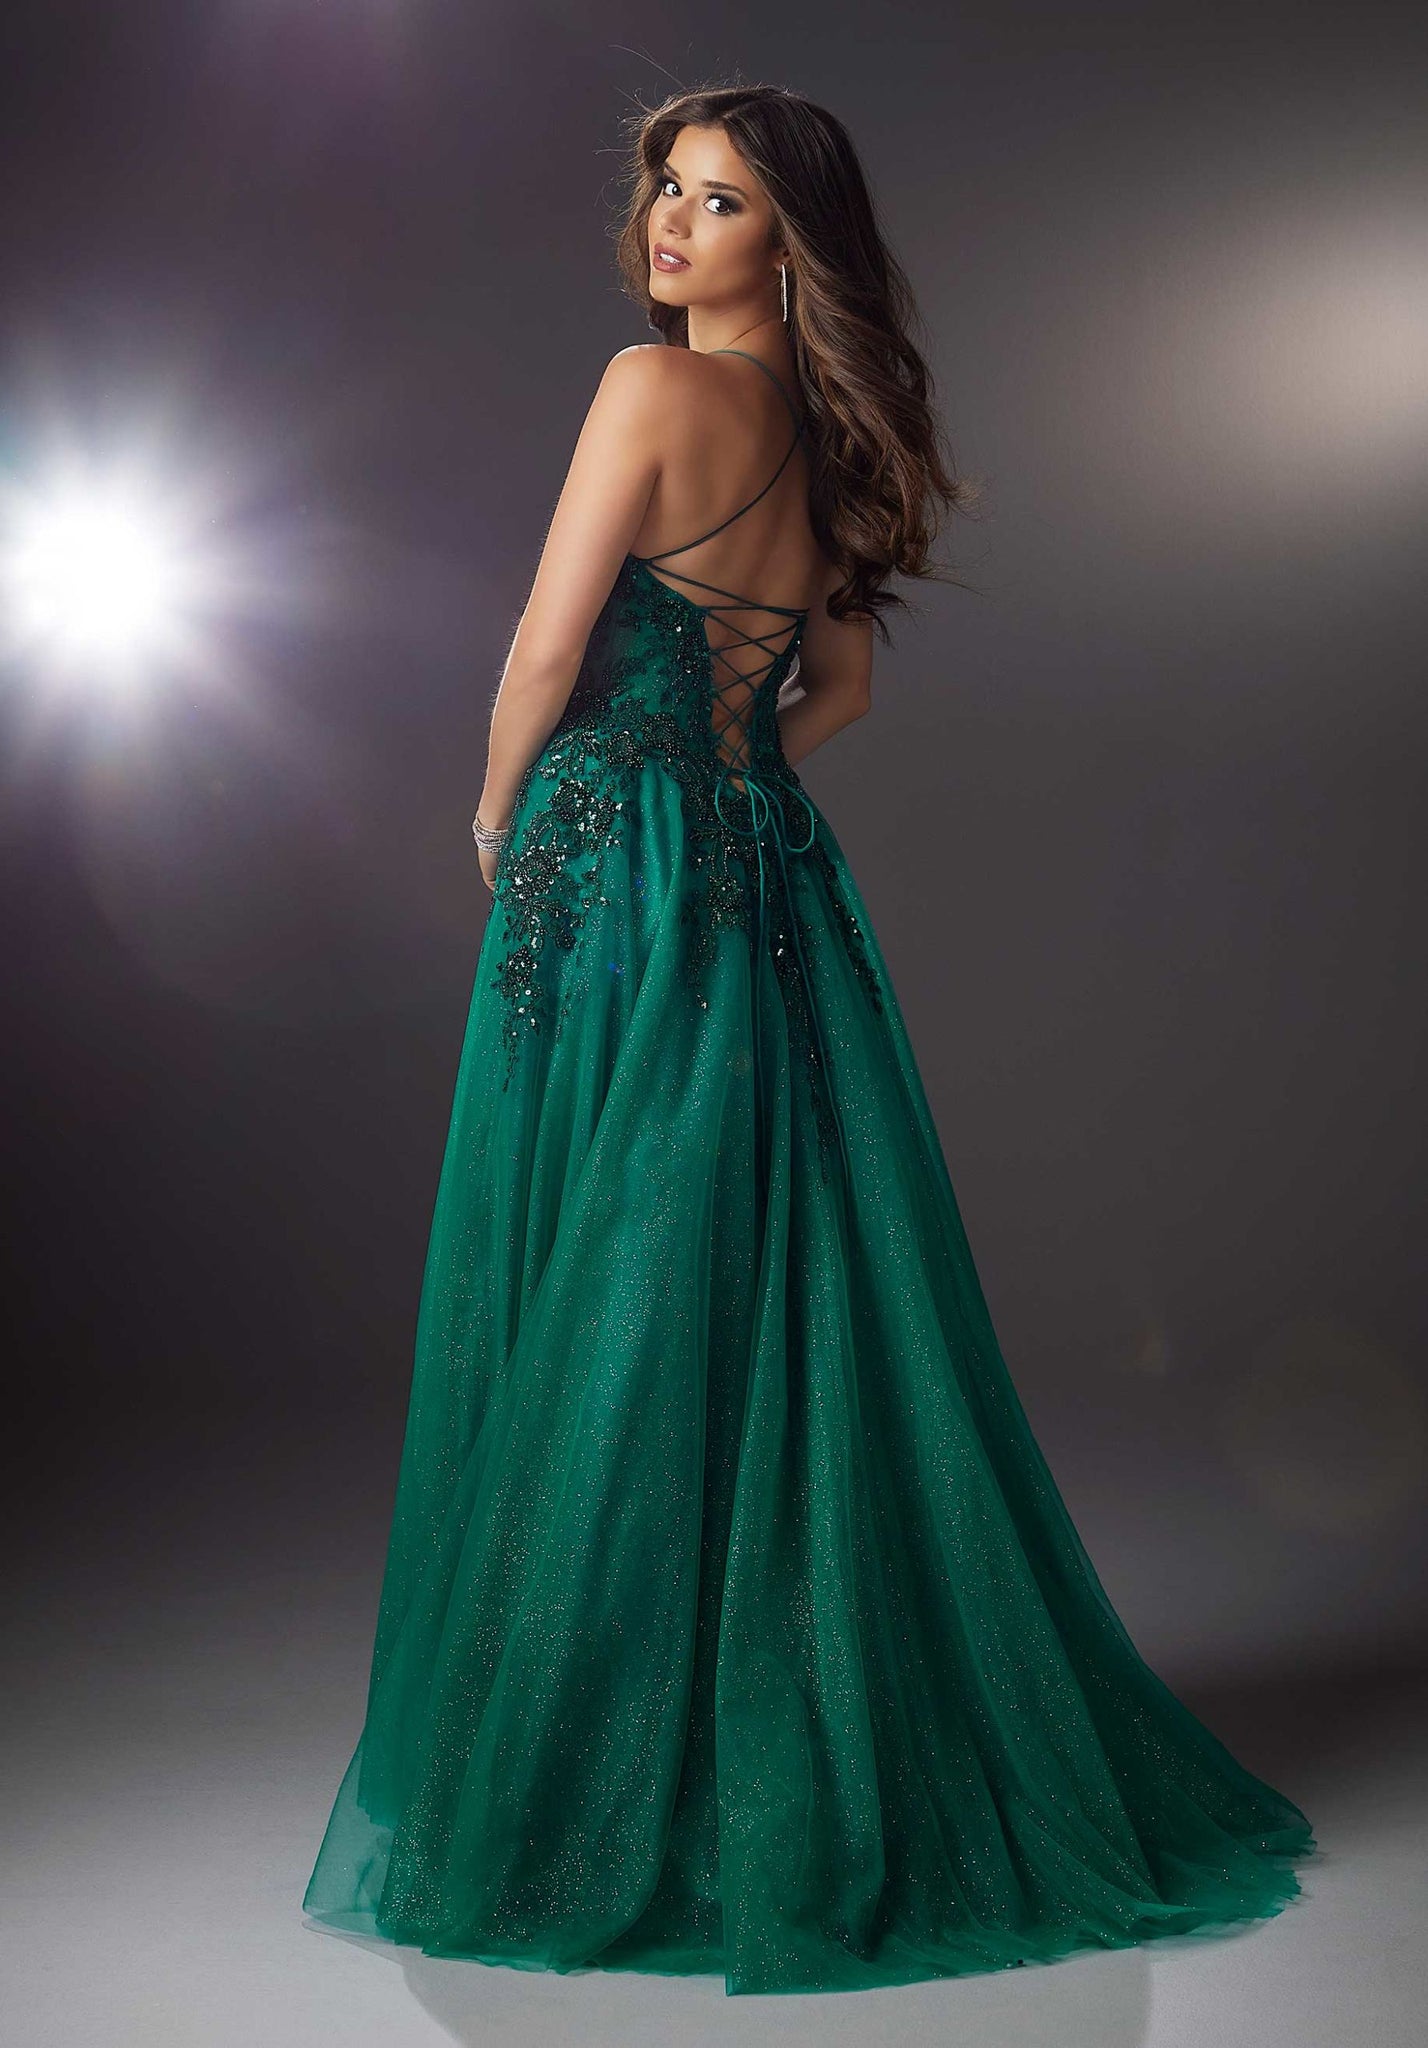 Elegant A-line prom features a delicate scoop neckline on a boned, corset bodice designed with stunning beaded lace appliqués that cascade down to the shimmering sparkle net skirt. Dainty spaghetti straps crisscross in the back leading to an open, lace-up corset back.